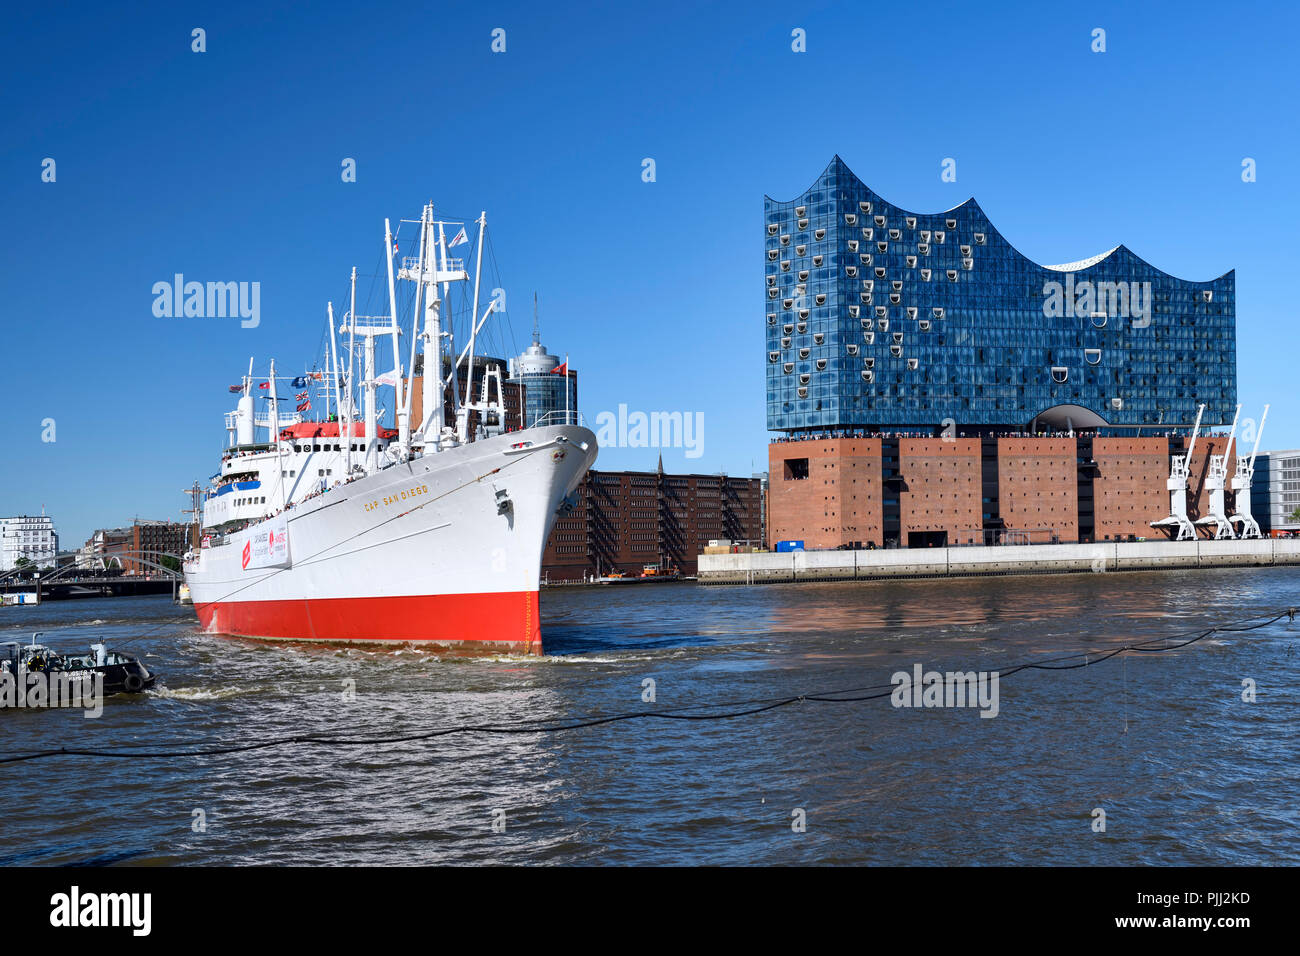 Museum ship Cap San Diego in the Elbphilharmonie in Hamburg, Germany, Europe, Museumsschiff Cap San Diego an der Elbphilharmonie in Hamburg, Deutschla Stock Photo